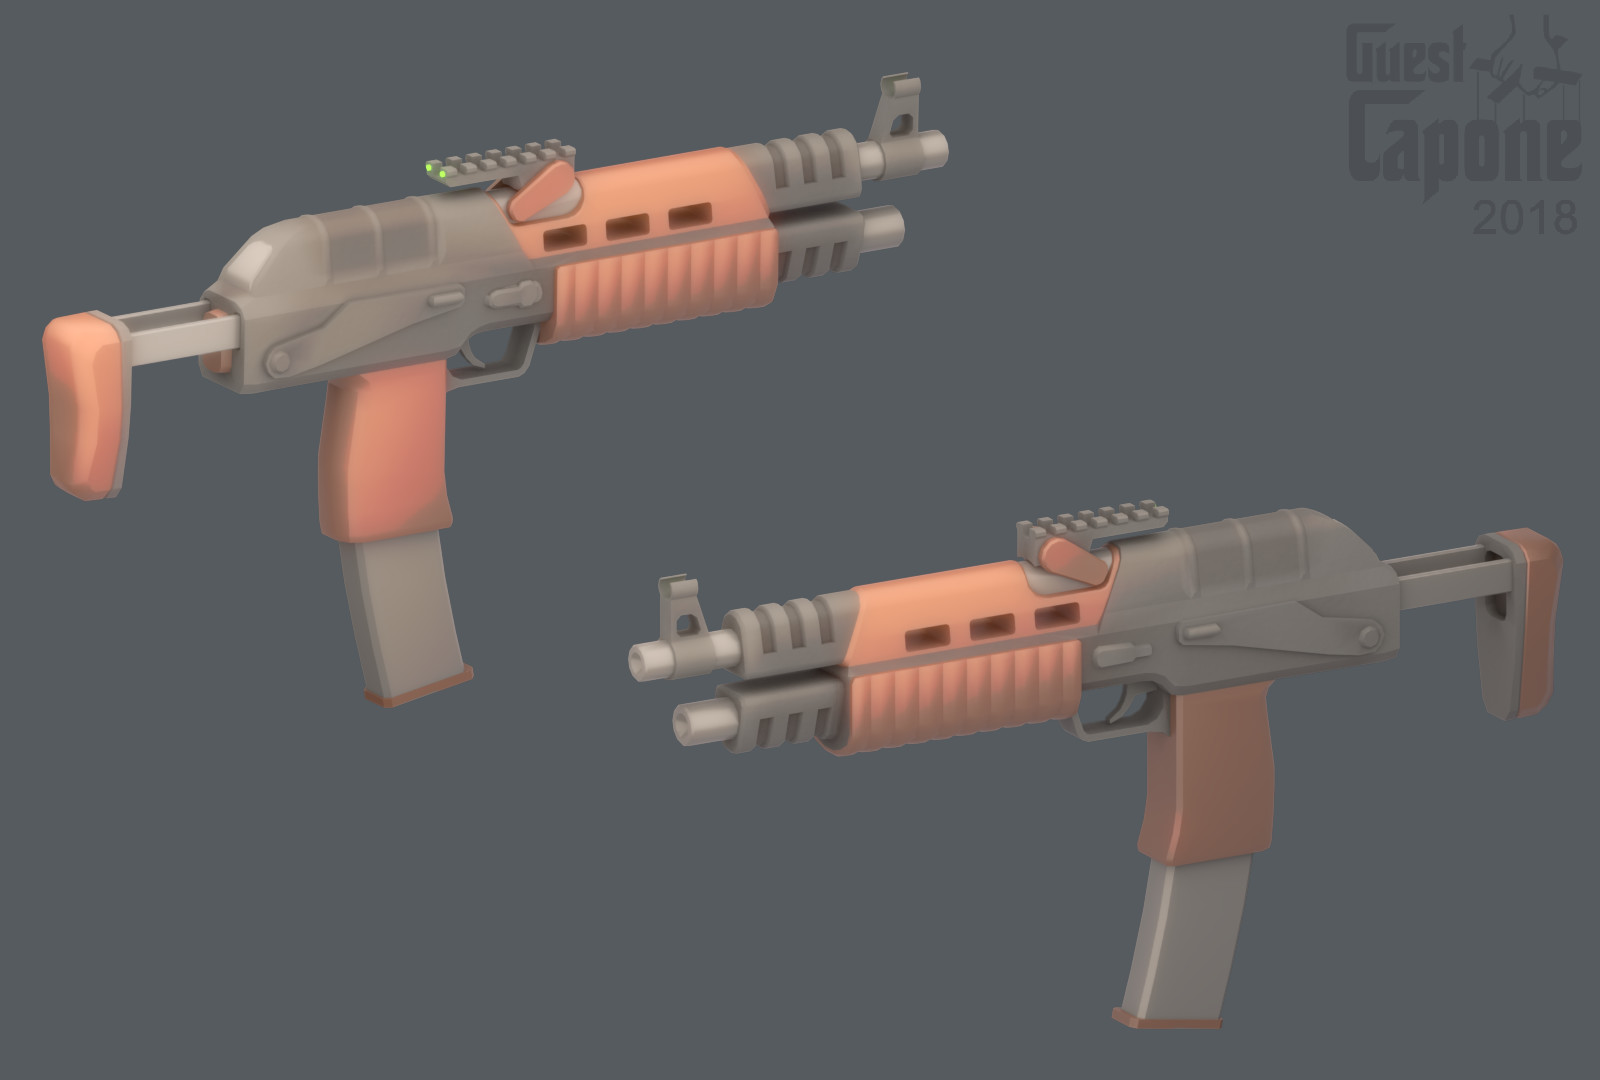 Guestcapone Freelancing 3d Artist And Modeler For Hire - planetside 2 weapons roblox